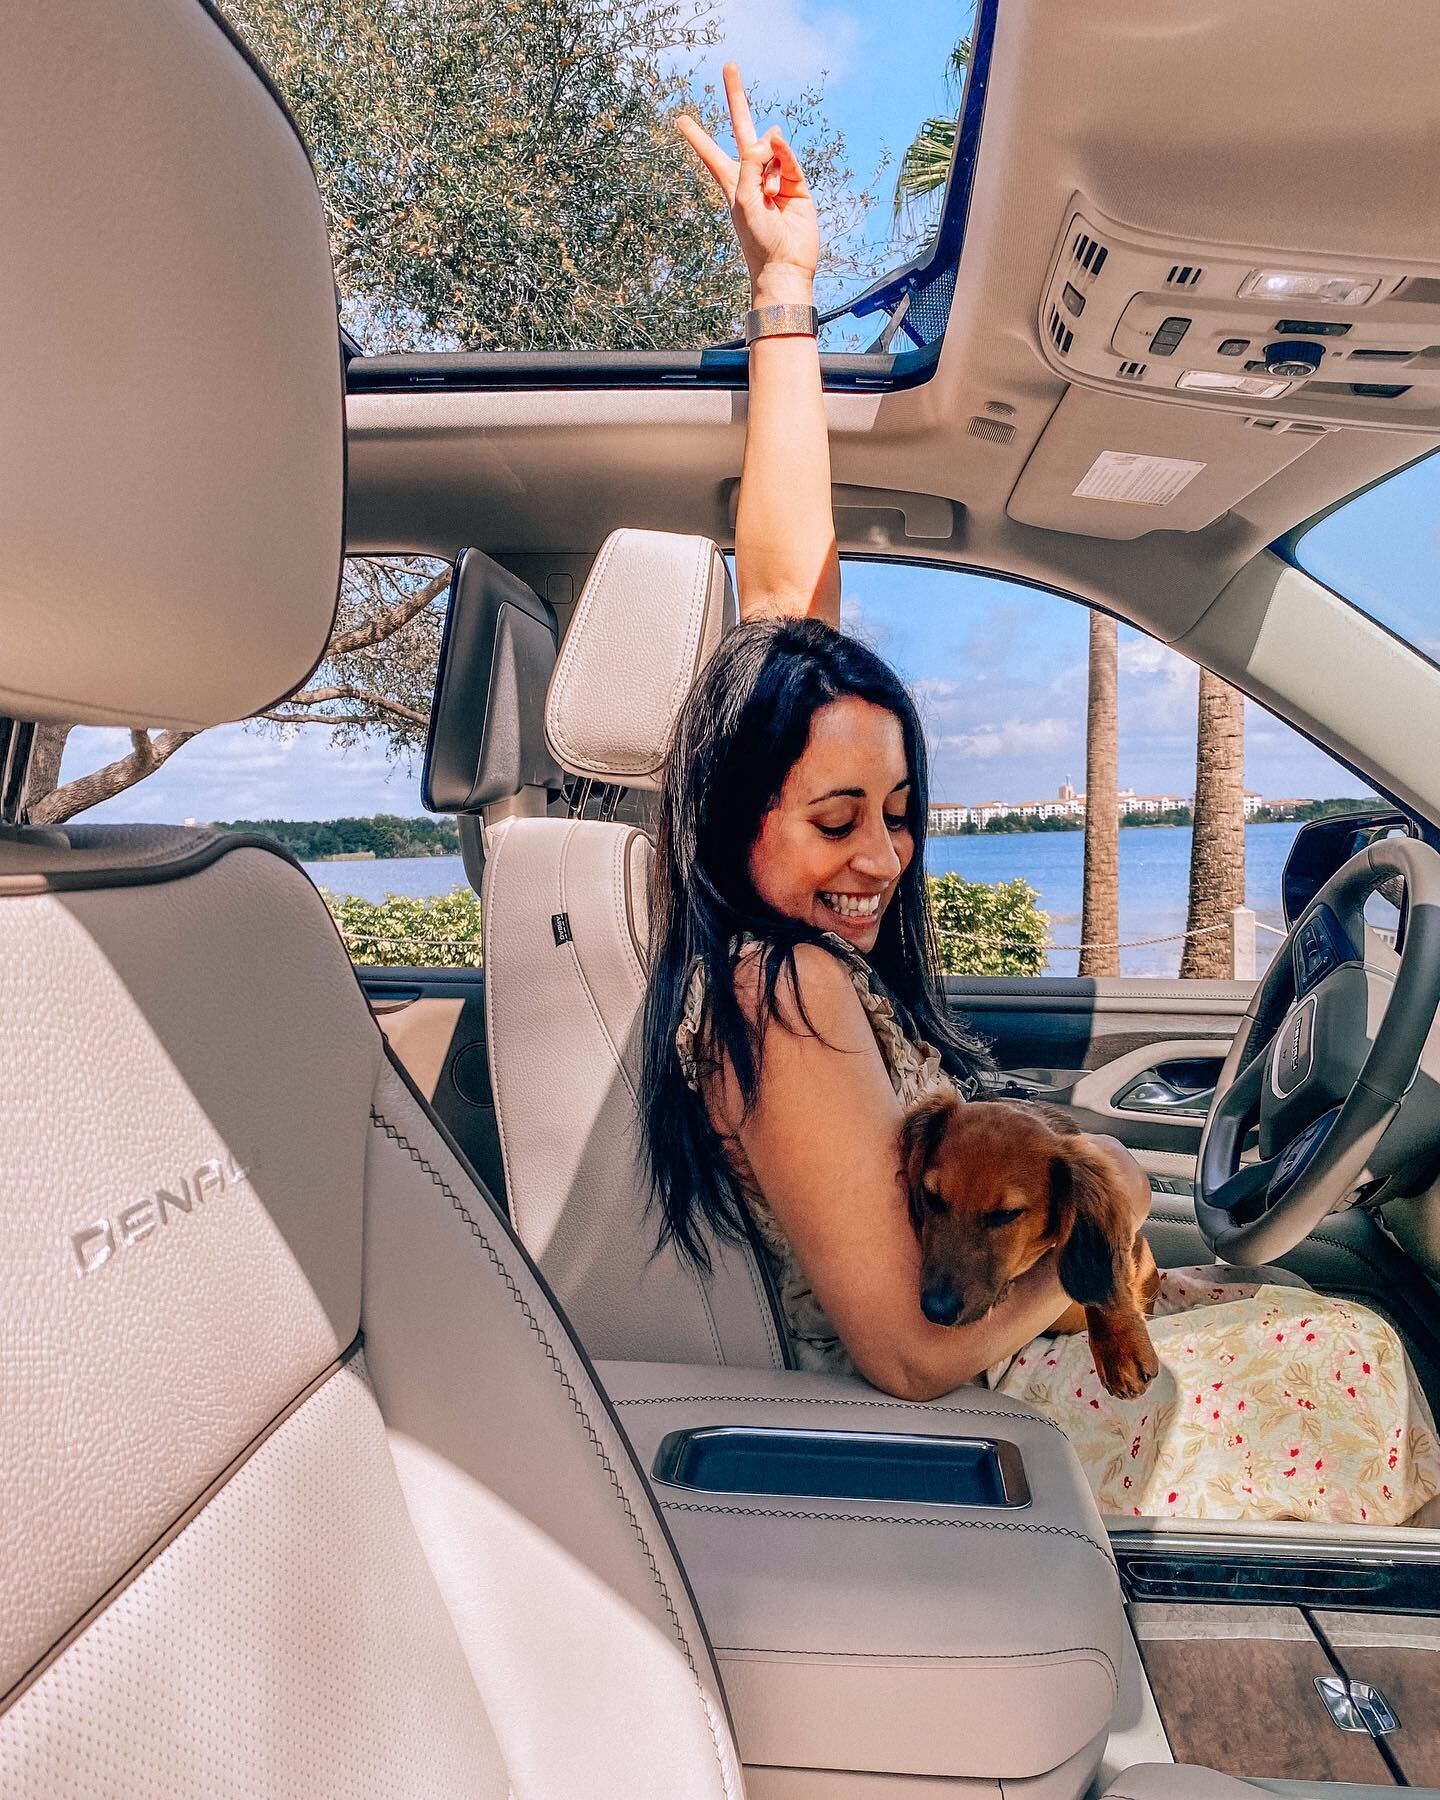 [𝗦𝗔𝗩𝗘 𝗙𝗢𝗥 𝗟𝗔𝗧𝗘𝗥]
🐶 10 TIPS FOR TRAVELING WITH YOUR PUP! 🐶

On Monday I talked about how I knew getting a dog during quarantine would change the way I travel. Now that I&rsquo;ve traveled with the little sausage boy I can give you some h